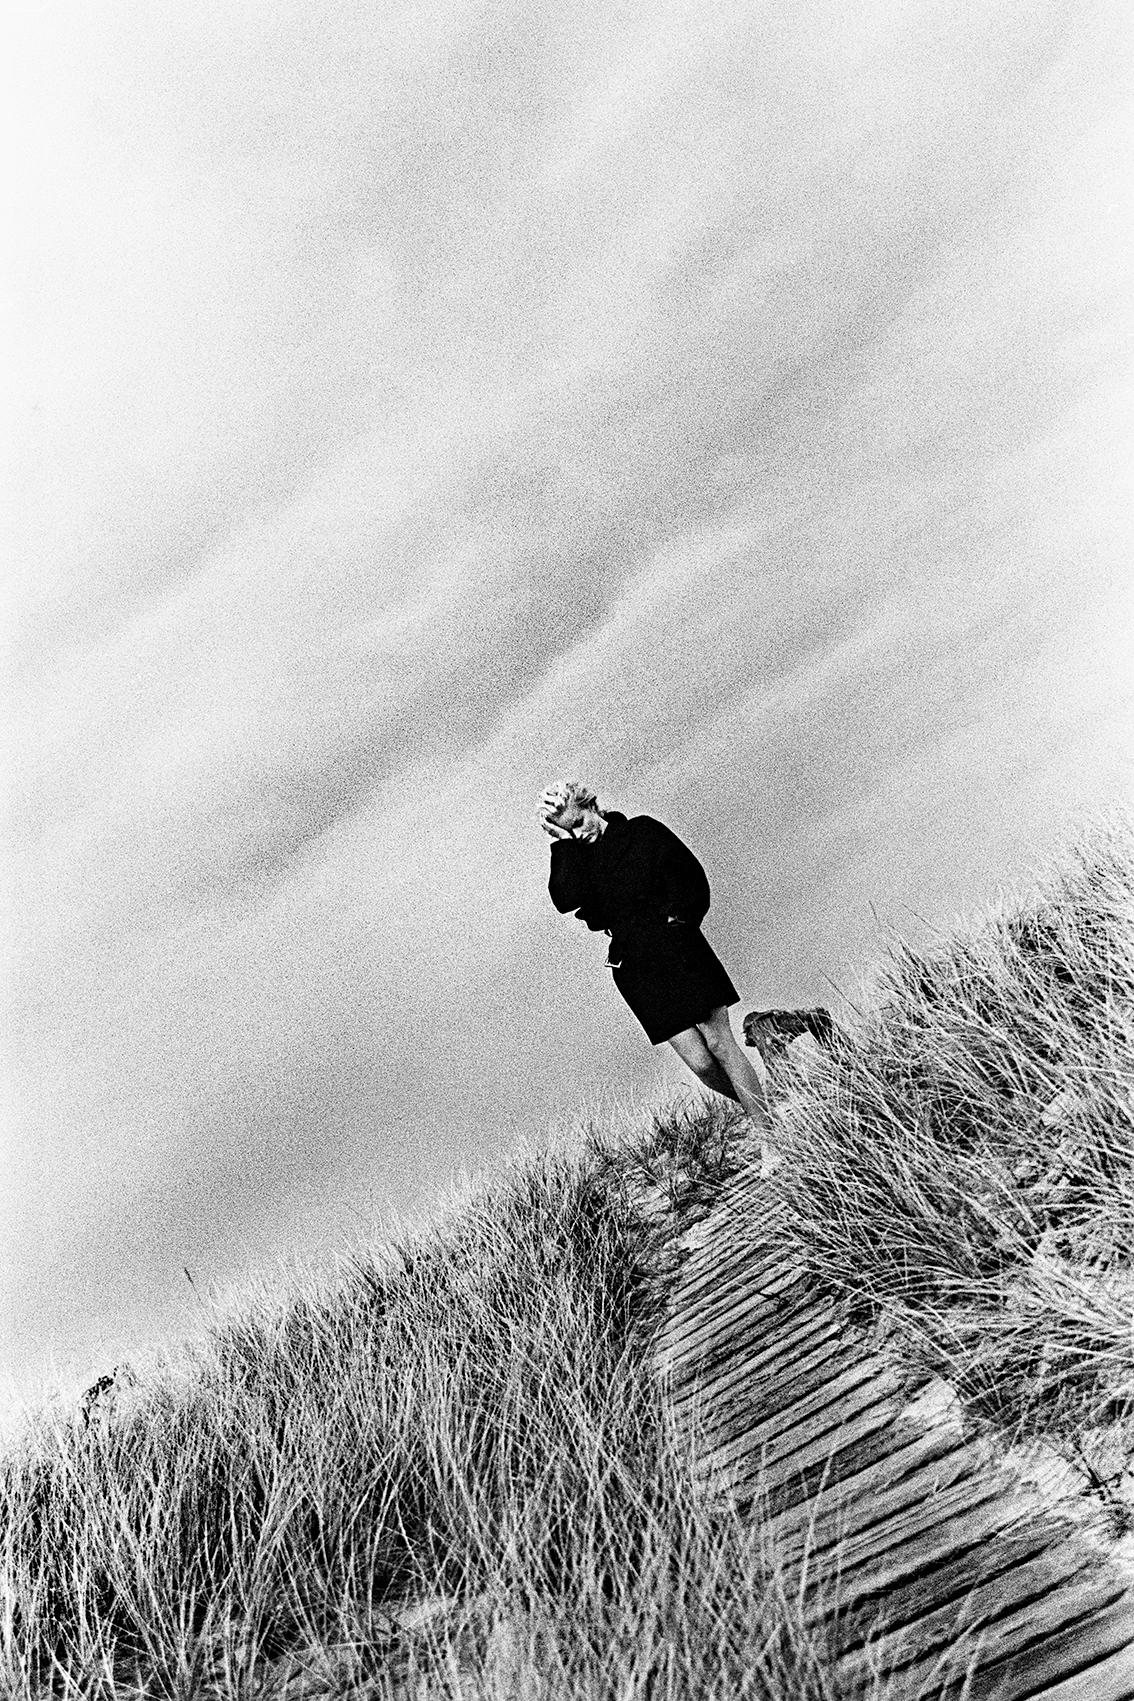 Hannes Schmid Black and White Photograph - "Sometimes I feel my whole life has been one big rejection.", The Hamptons